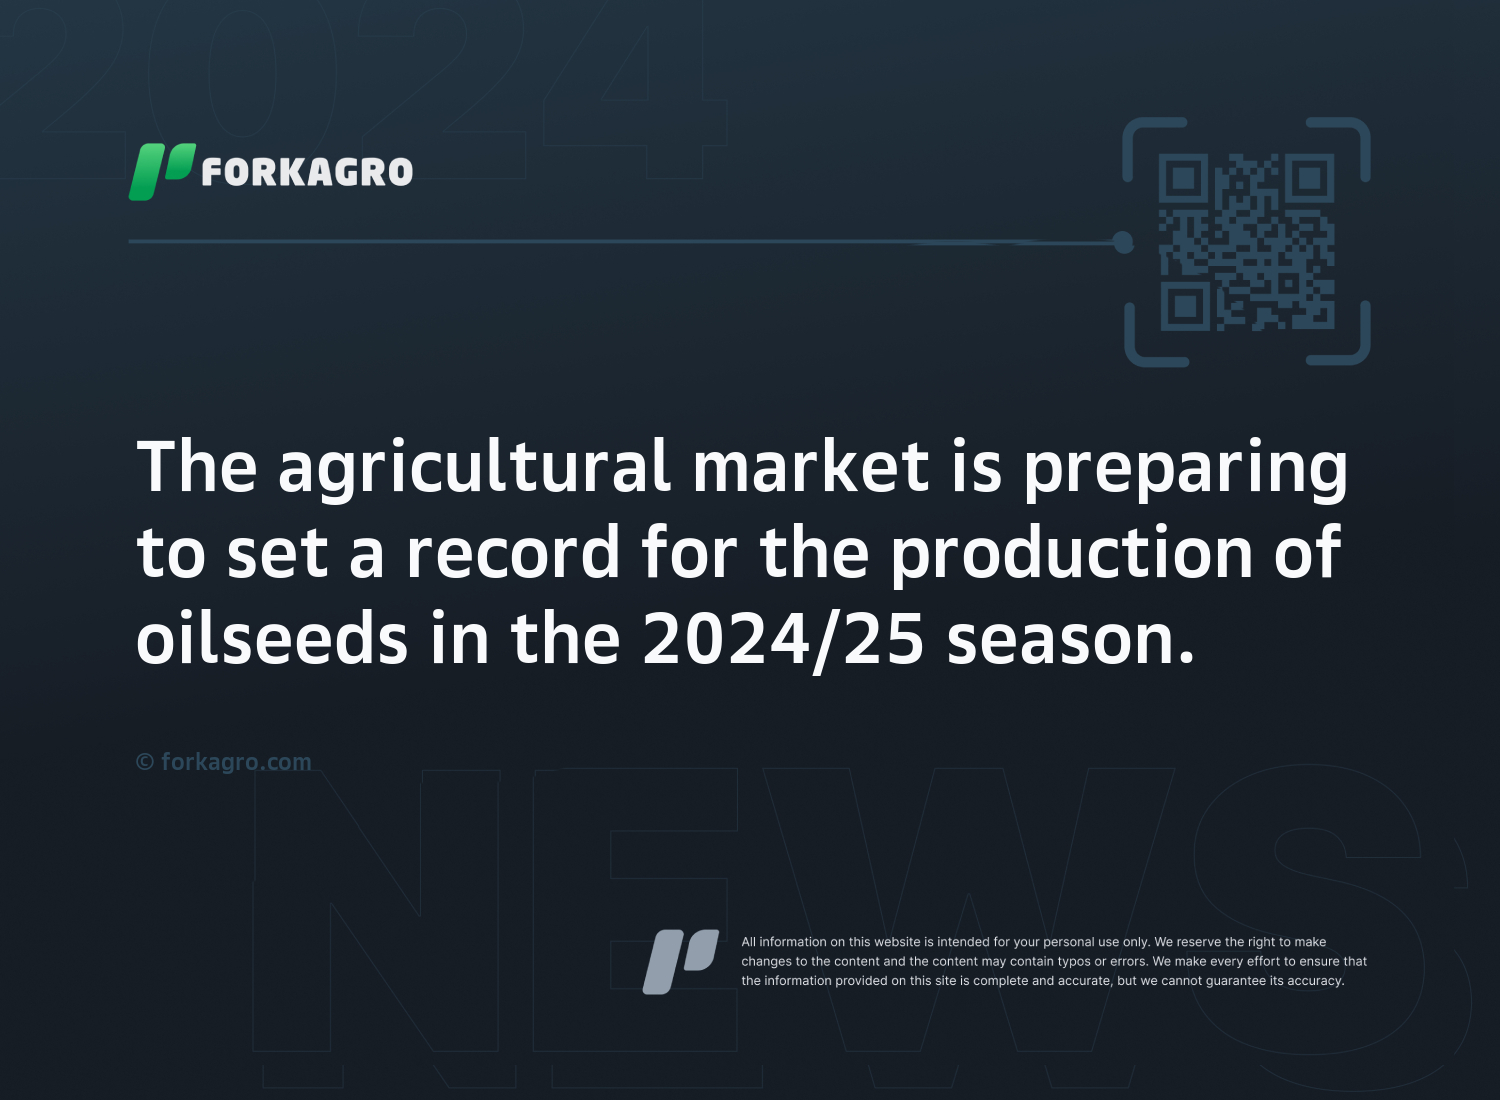 The agricultural market is preparing to set a record for the production of oilseeds in the 2024/25 season.